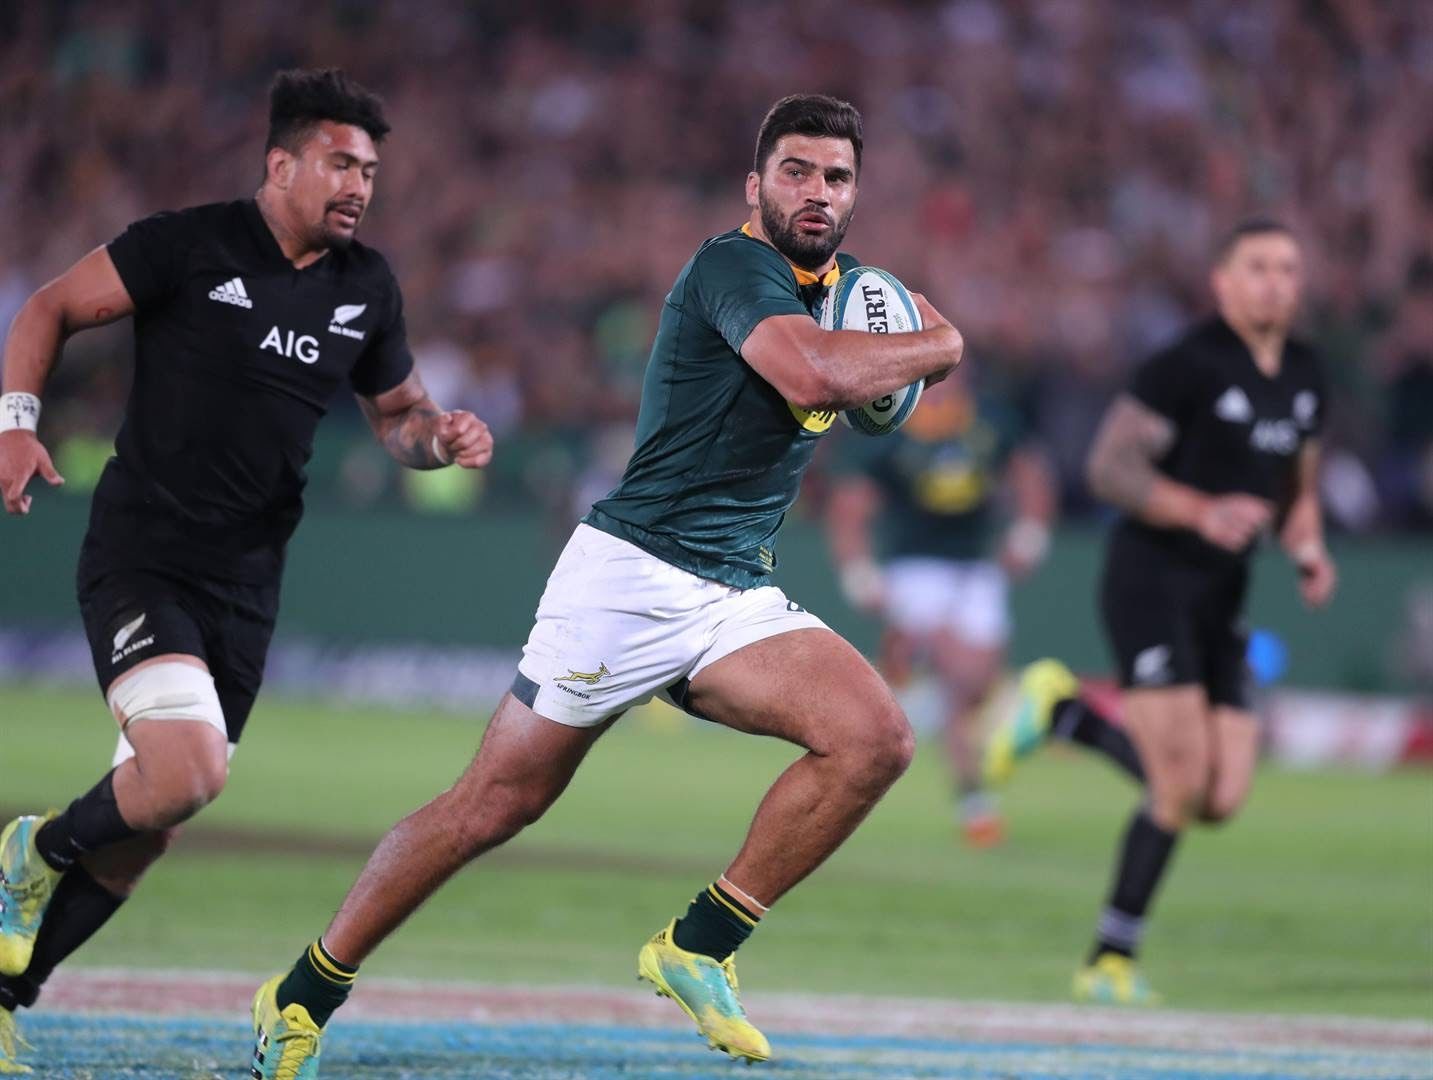 South Africa beat New Zealand in Rugby thriller